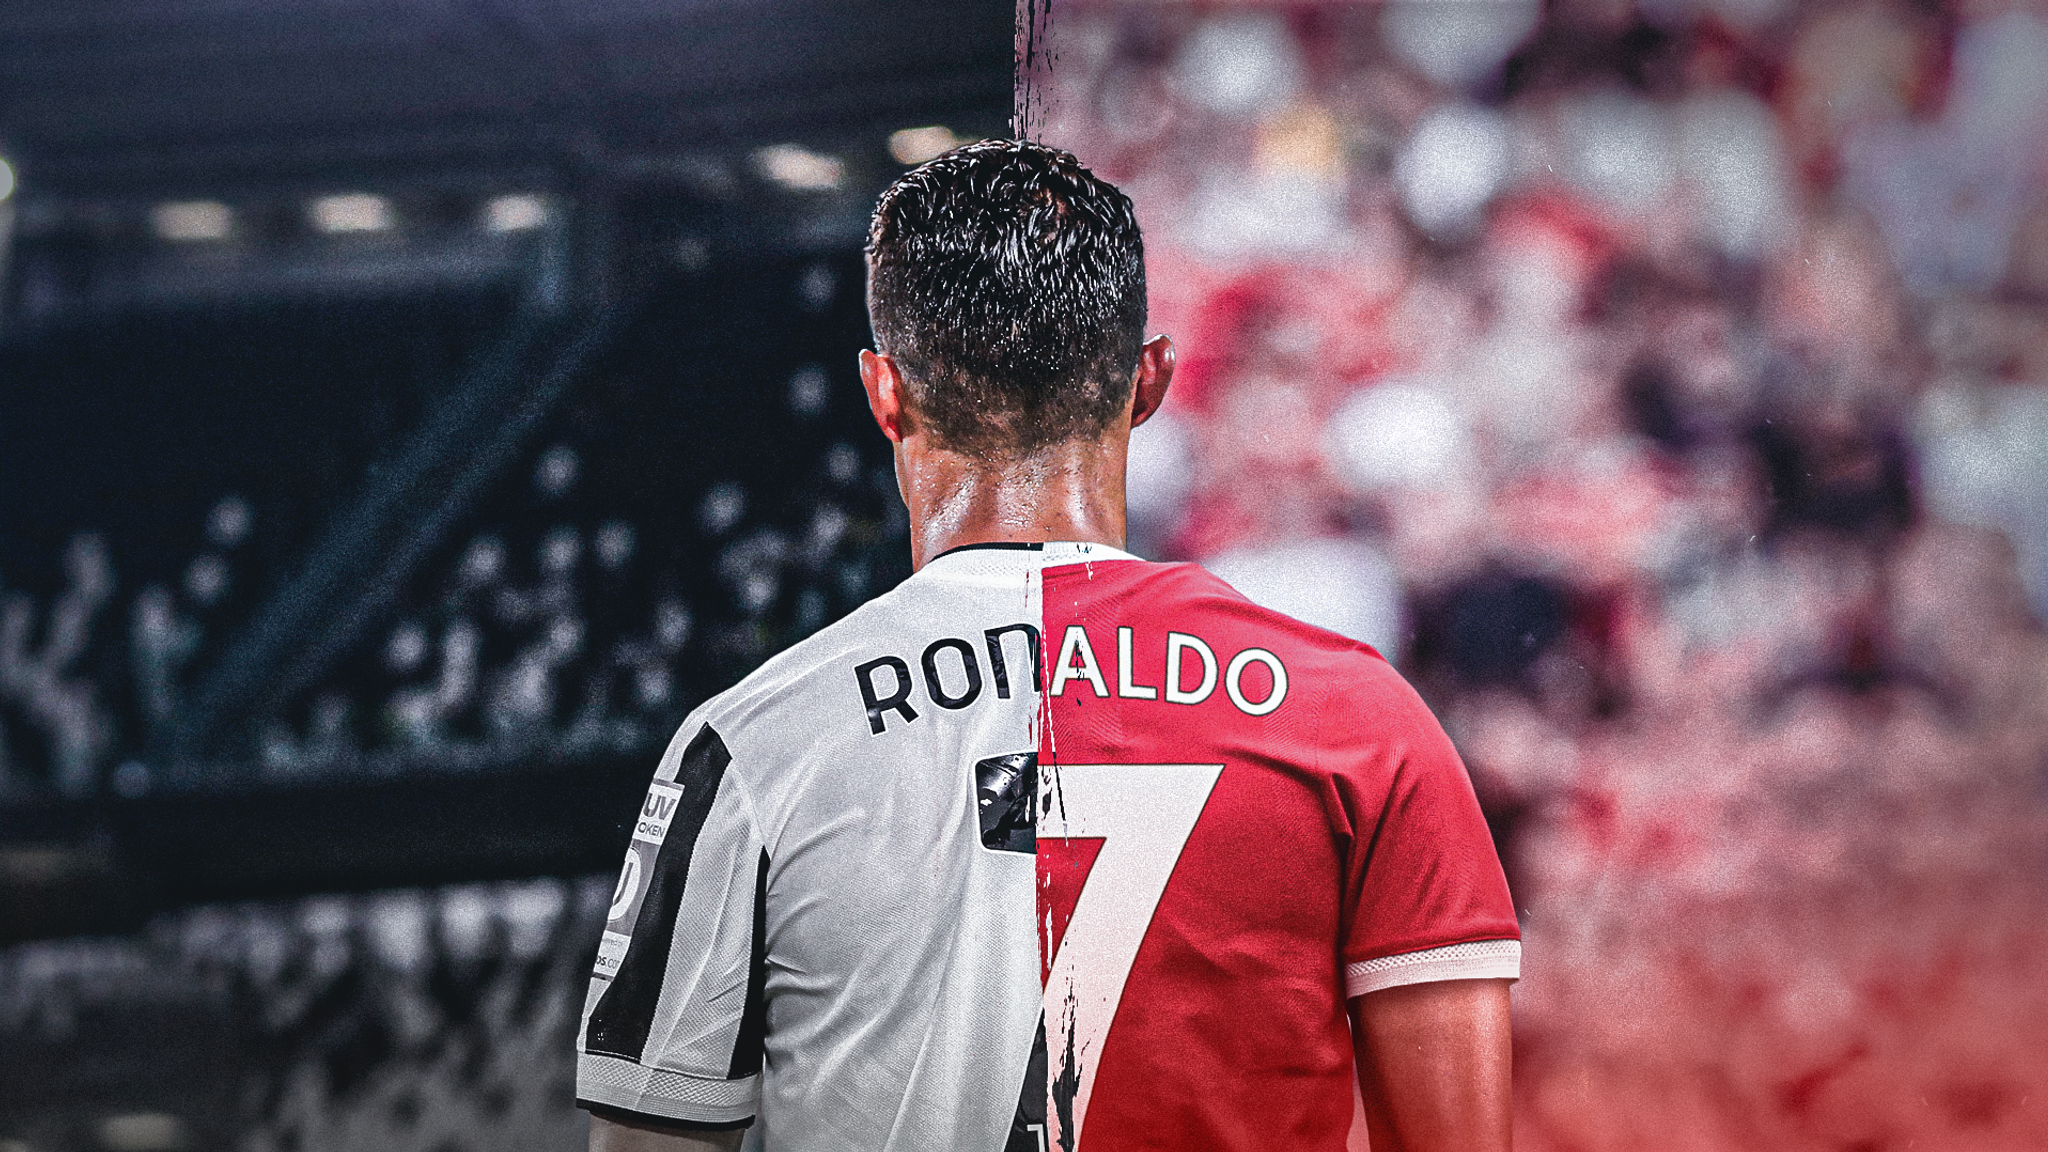 Cristiano Ronaldo: 7 facts you did not know about the football